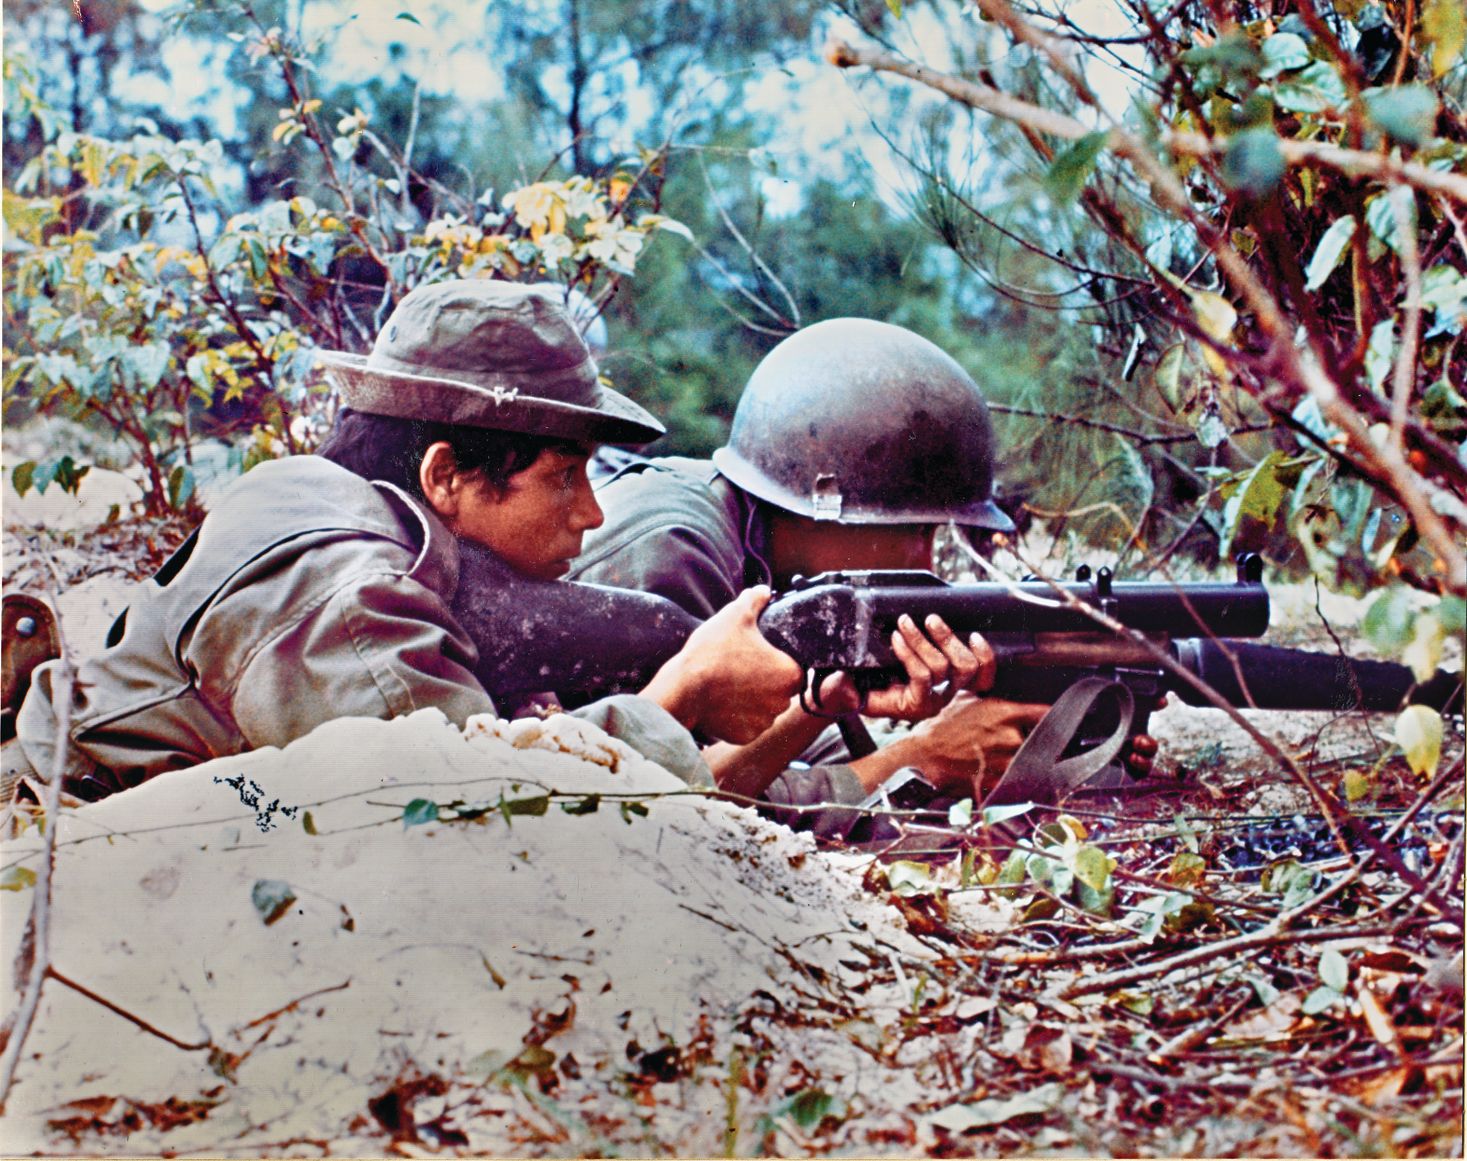 Sharpshooting South Vietnamese riflemen exchange fire with enemy fighters near Quang Tri, below the DMZ.